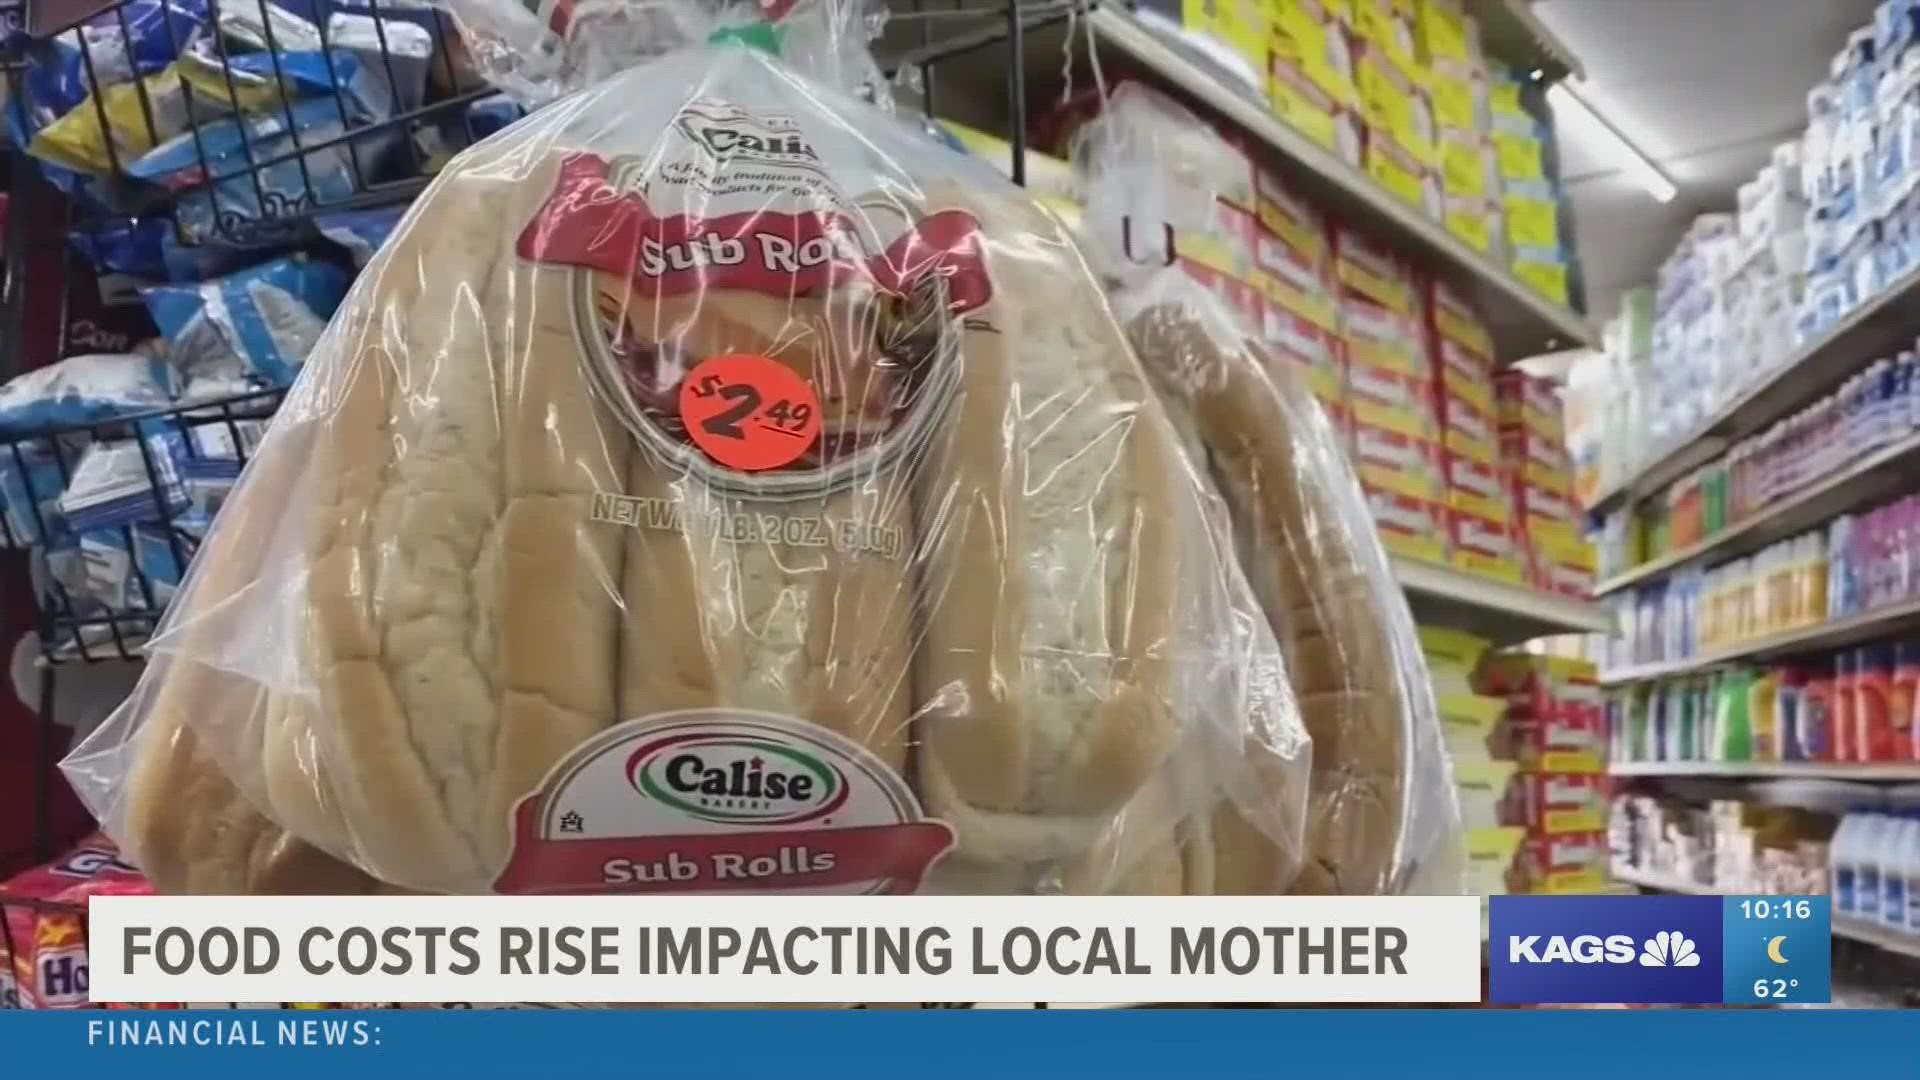 Soaring grocery bills at the supermarket are grounding budgets across the U.S. One Bryan mother spoke to KAGS about how it's affecting her family like many others.